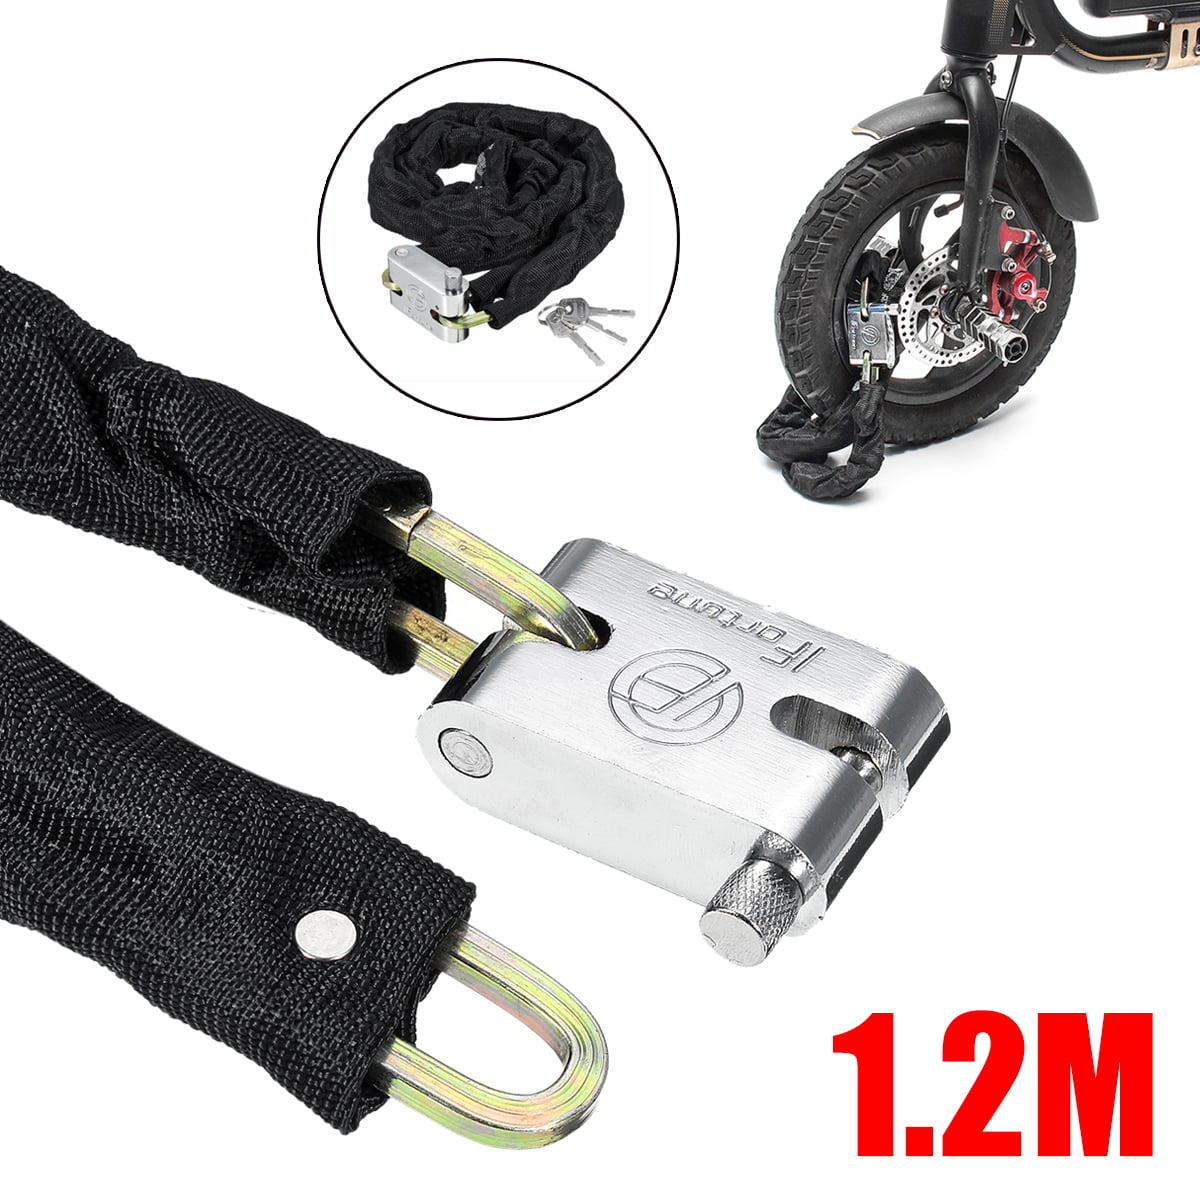 Bike Motorbike Chain Lock Cycle Scooter Bicycle Strong Heavy Duty Security 3 Key 